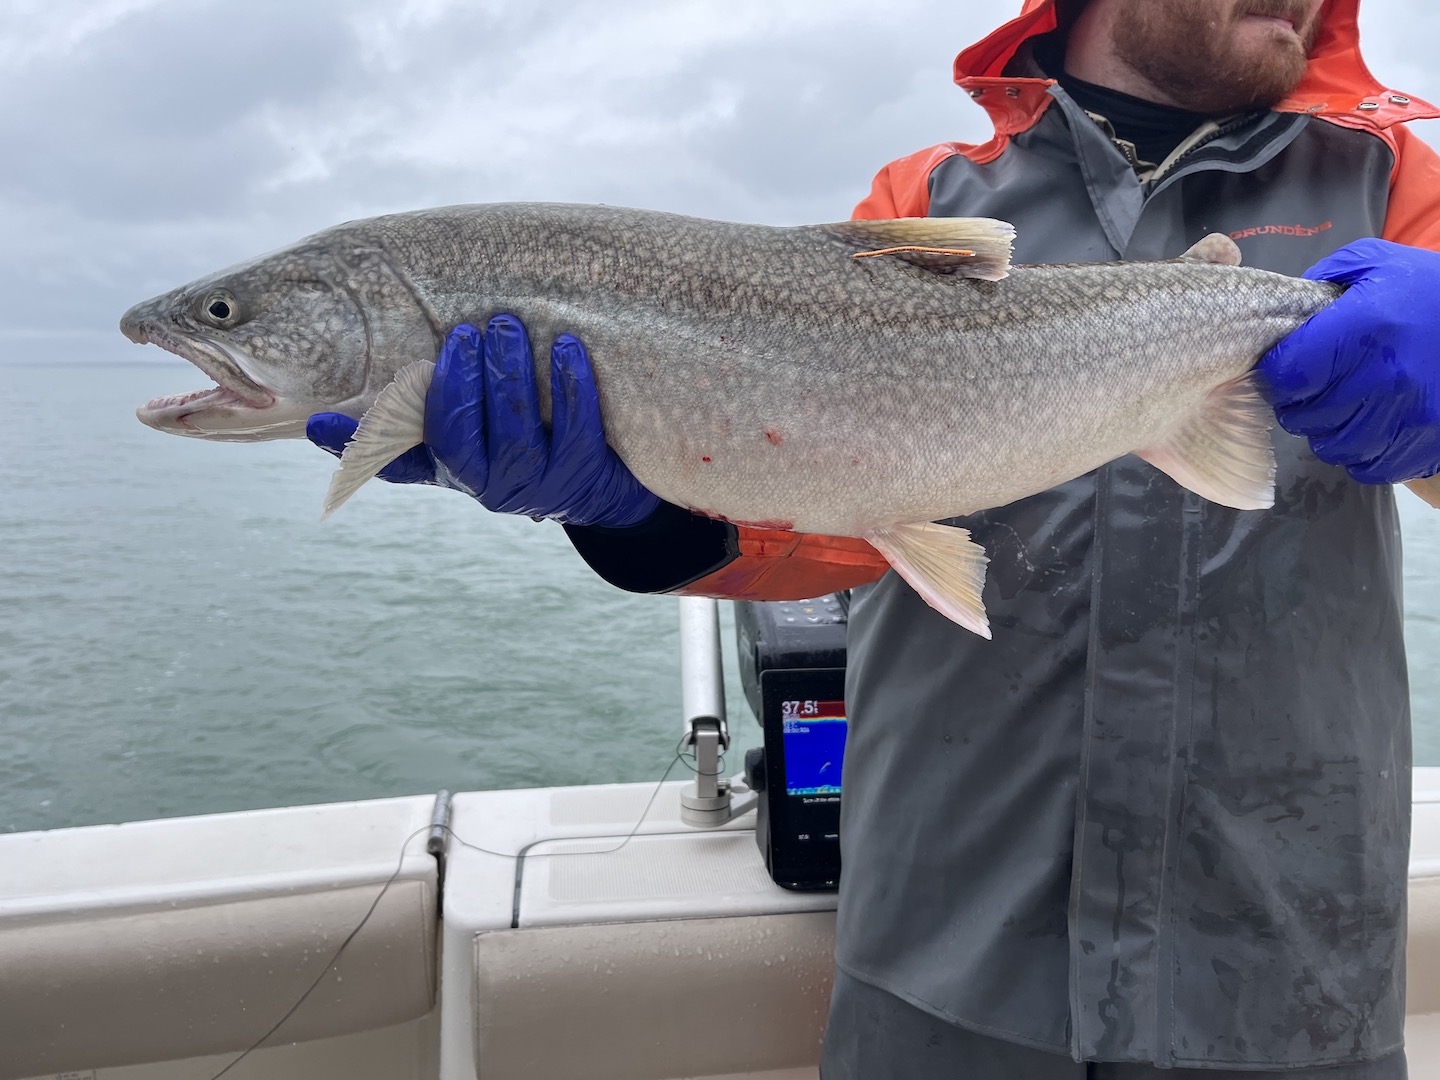 The orange-colored external acoustic tag, below the dorsal fin, identifies this fish as tagged in 2023. It is one of the first wild lake trout to be tagged in Lake Ontario. (Photo: Jo Johnson/U/SFWS)